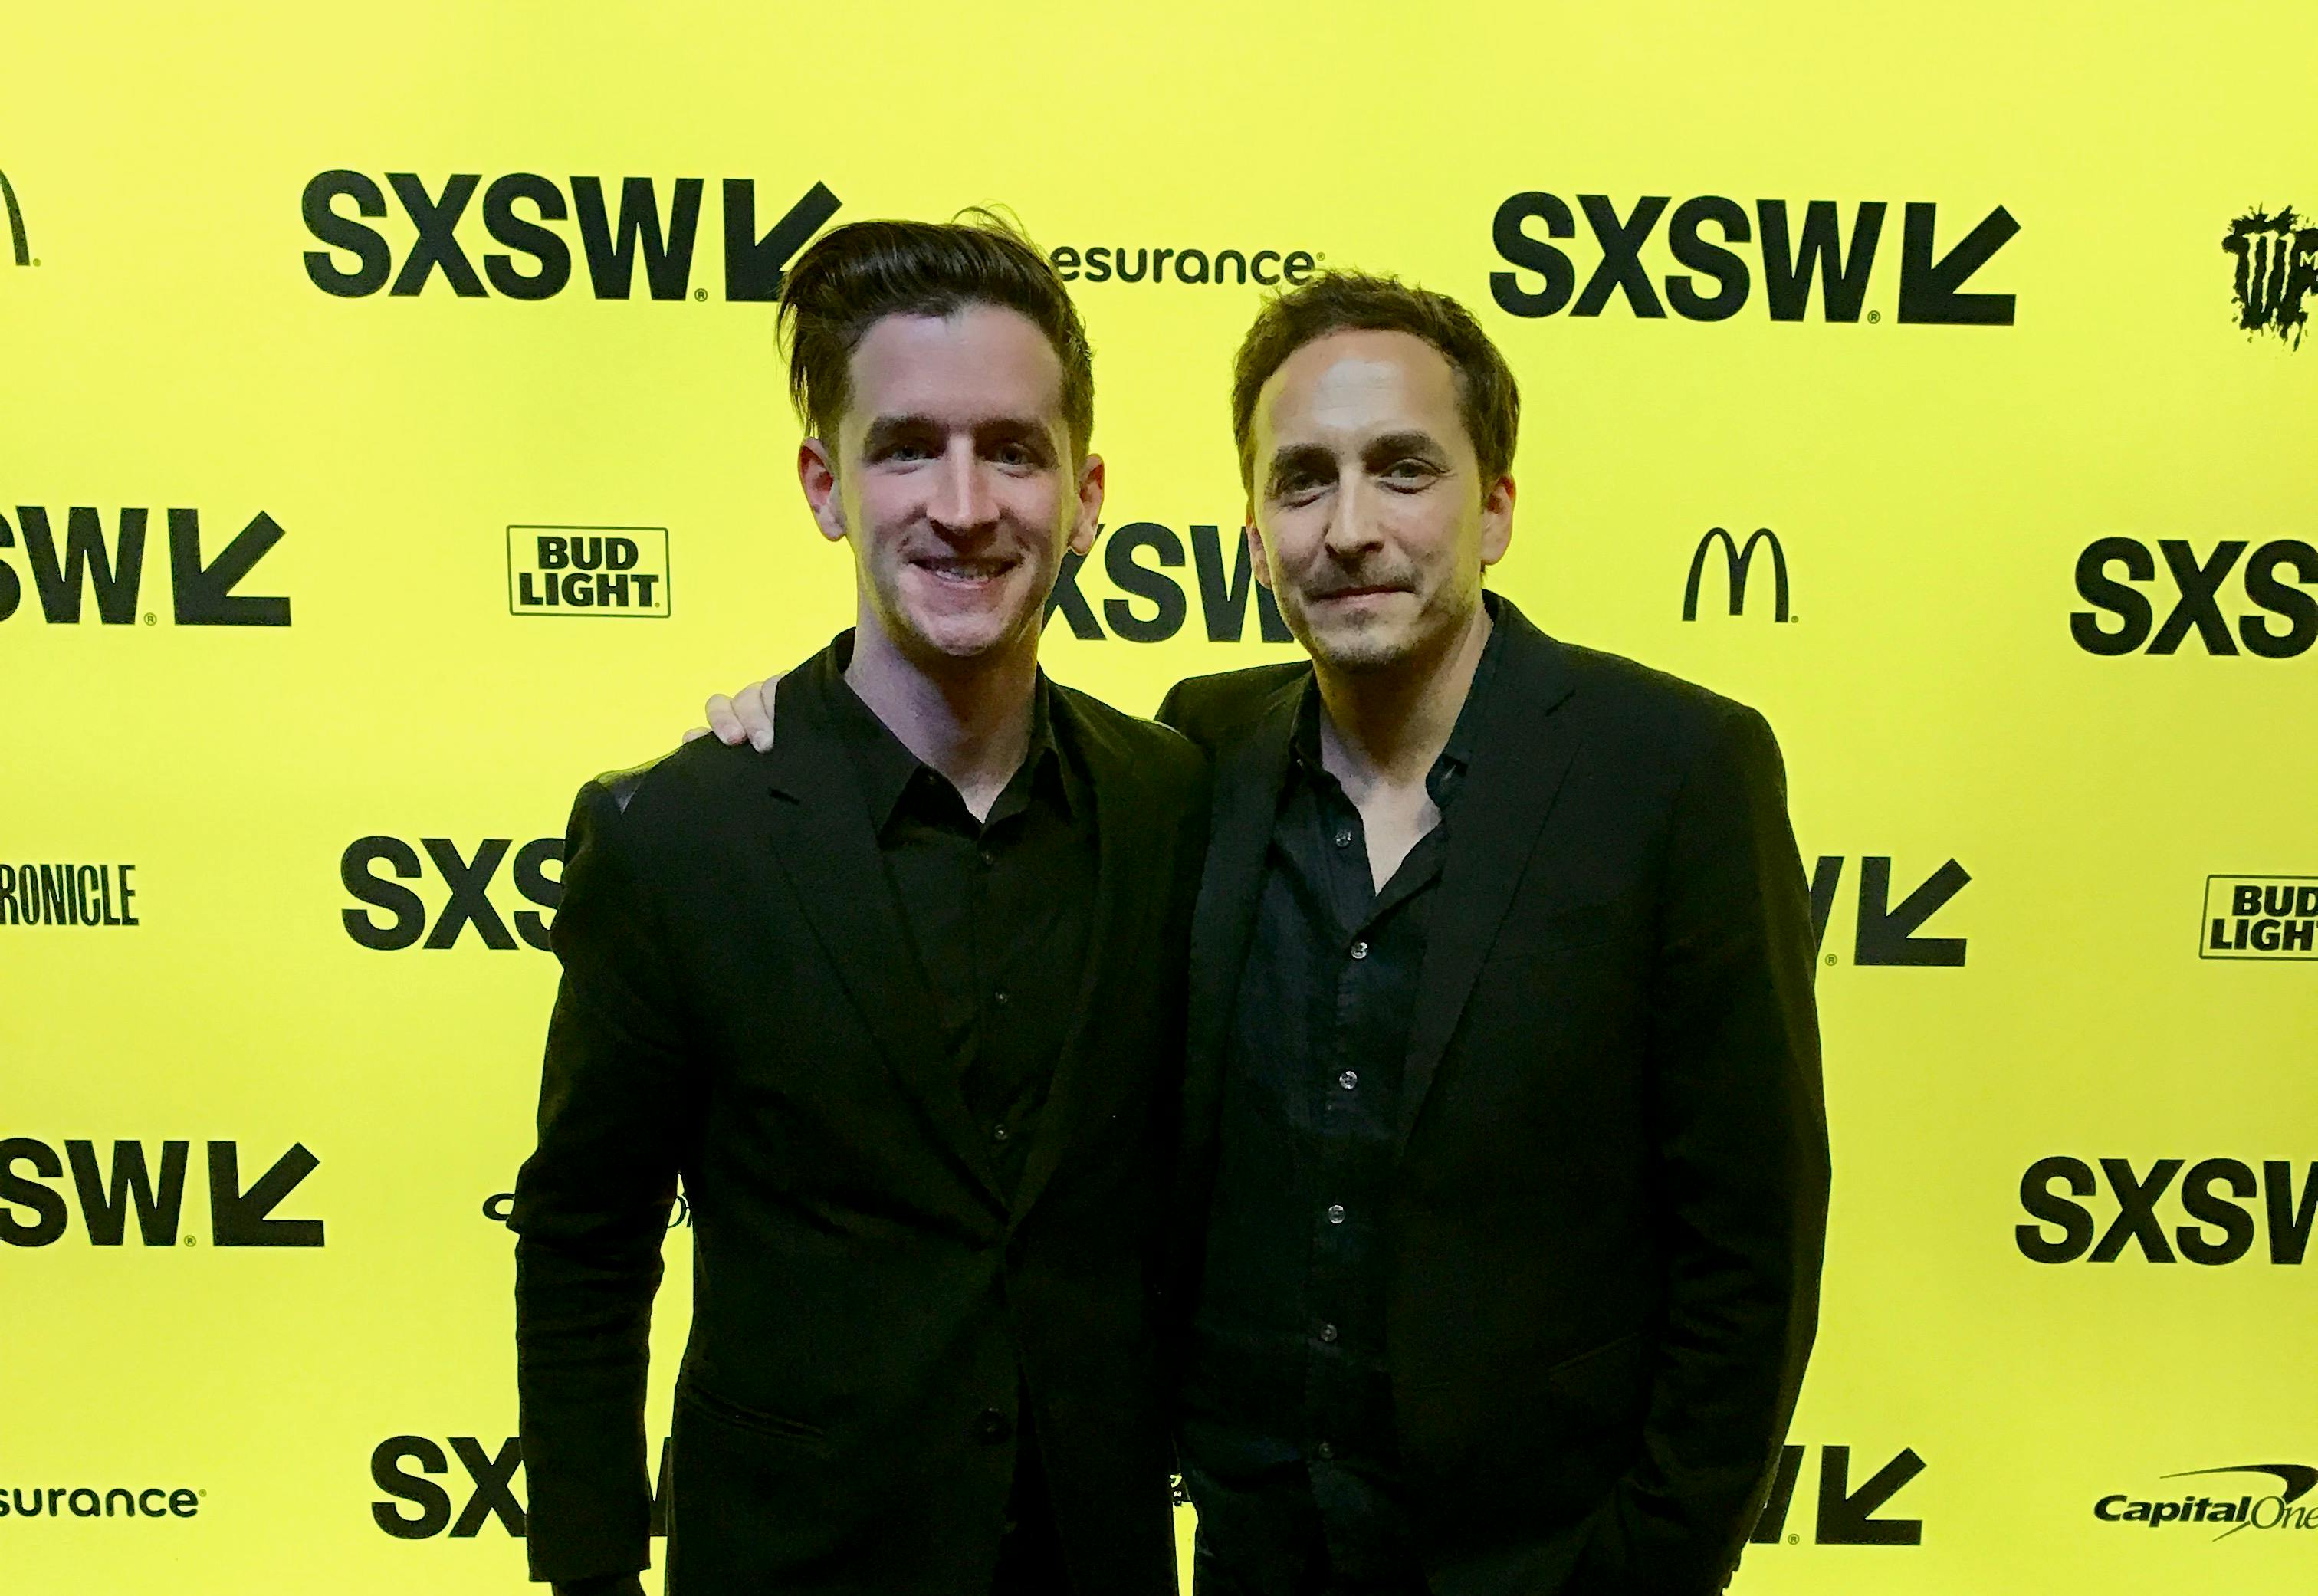 Me (left) and Brent (right) after the premier of "METH STORM" at SXSW March 11th, 2017.